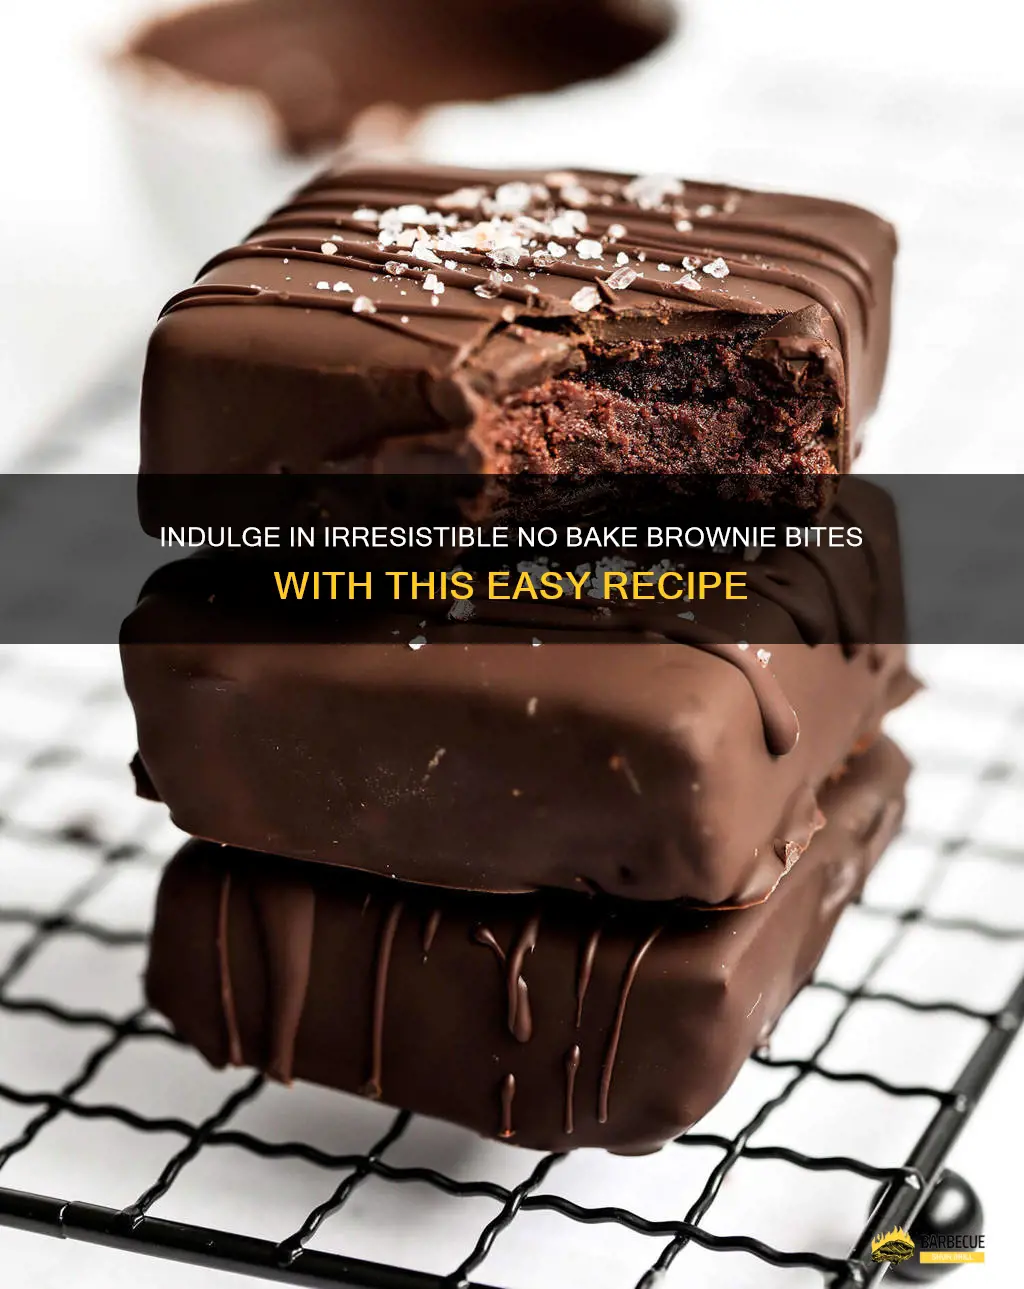 Indulge In Irresistible No Bake Brownie Bites With This Easy Recipe ...